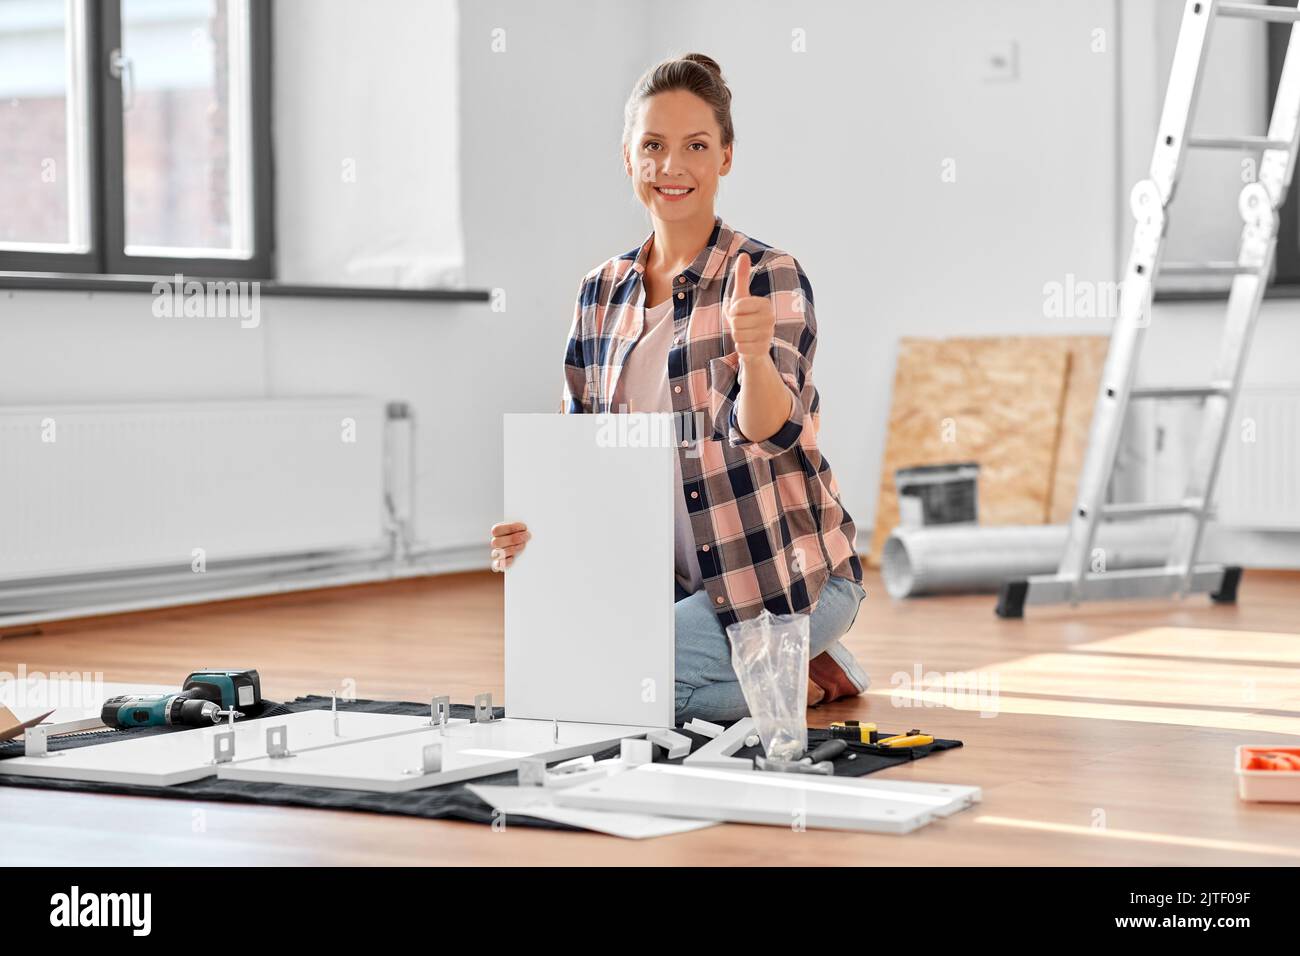 woman assembling furniture and showing thumbs up Stock Photo